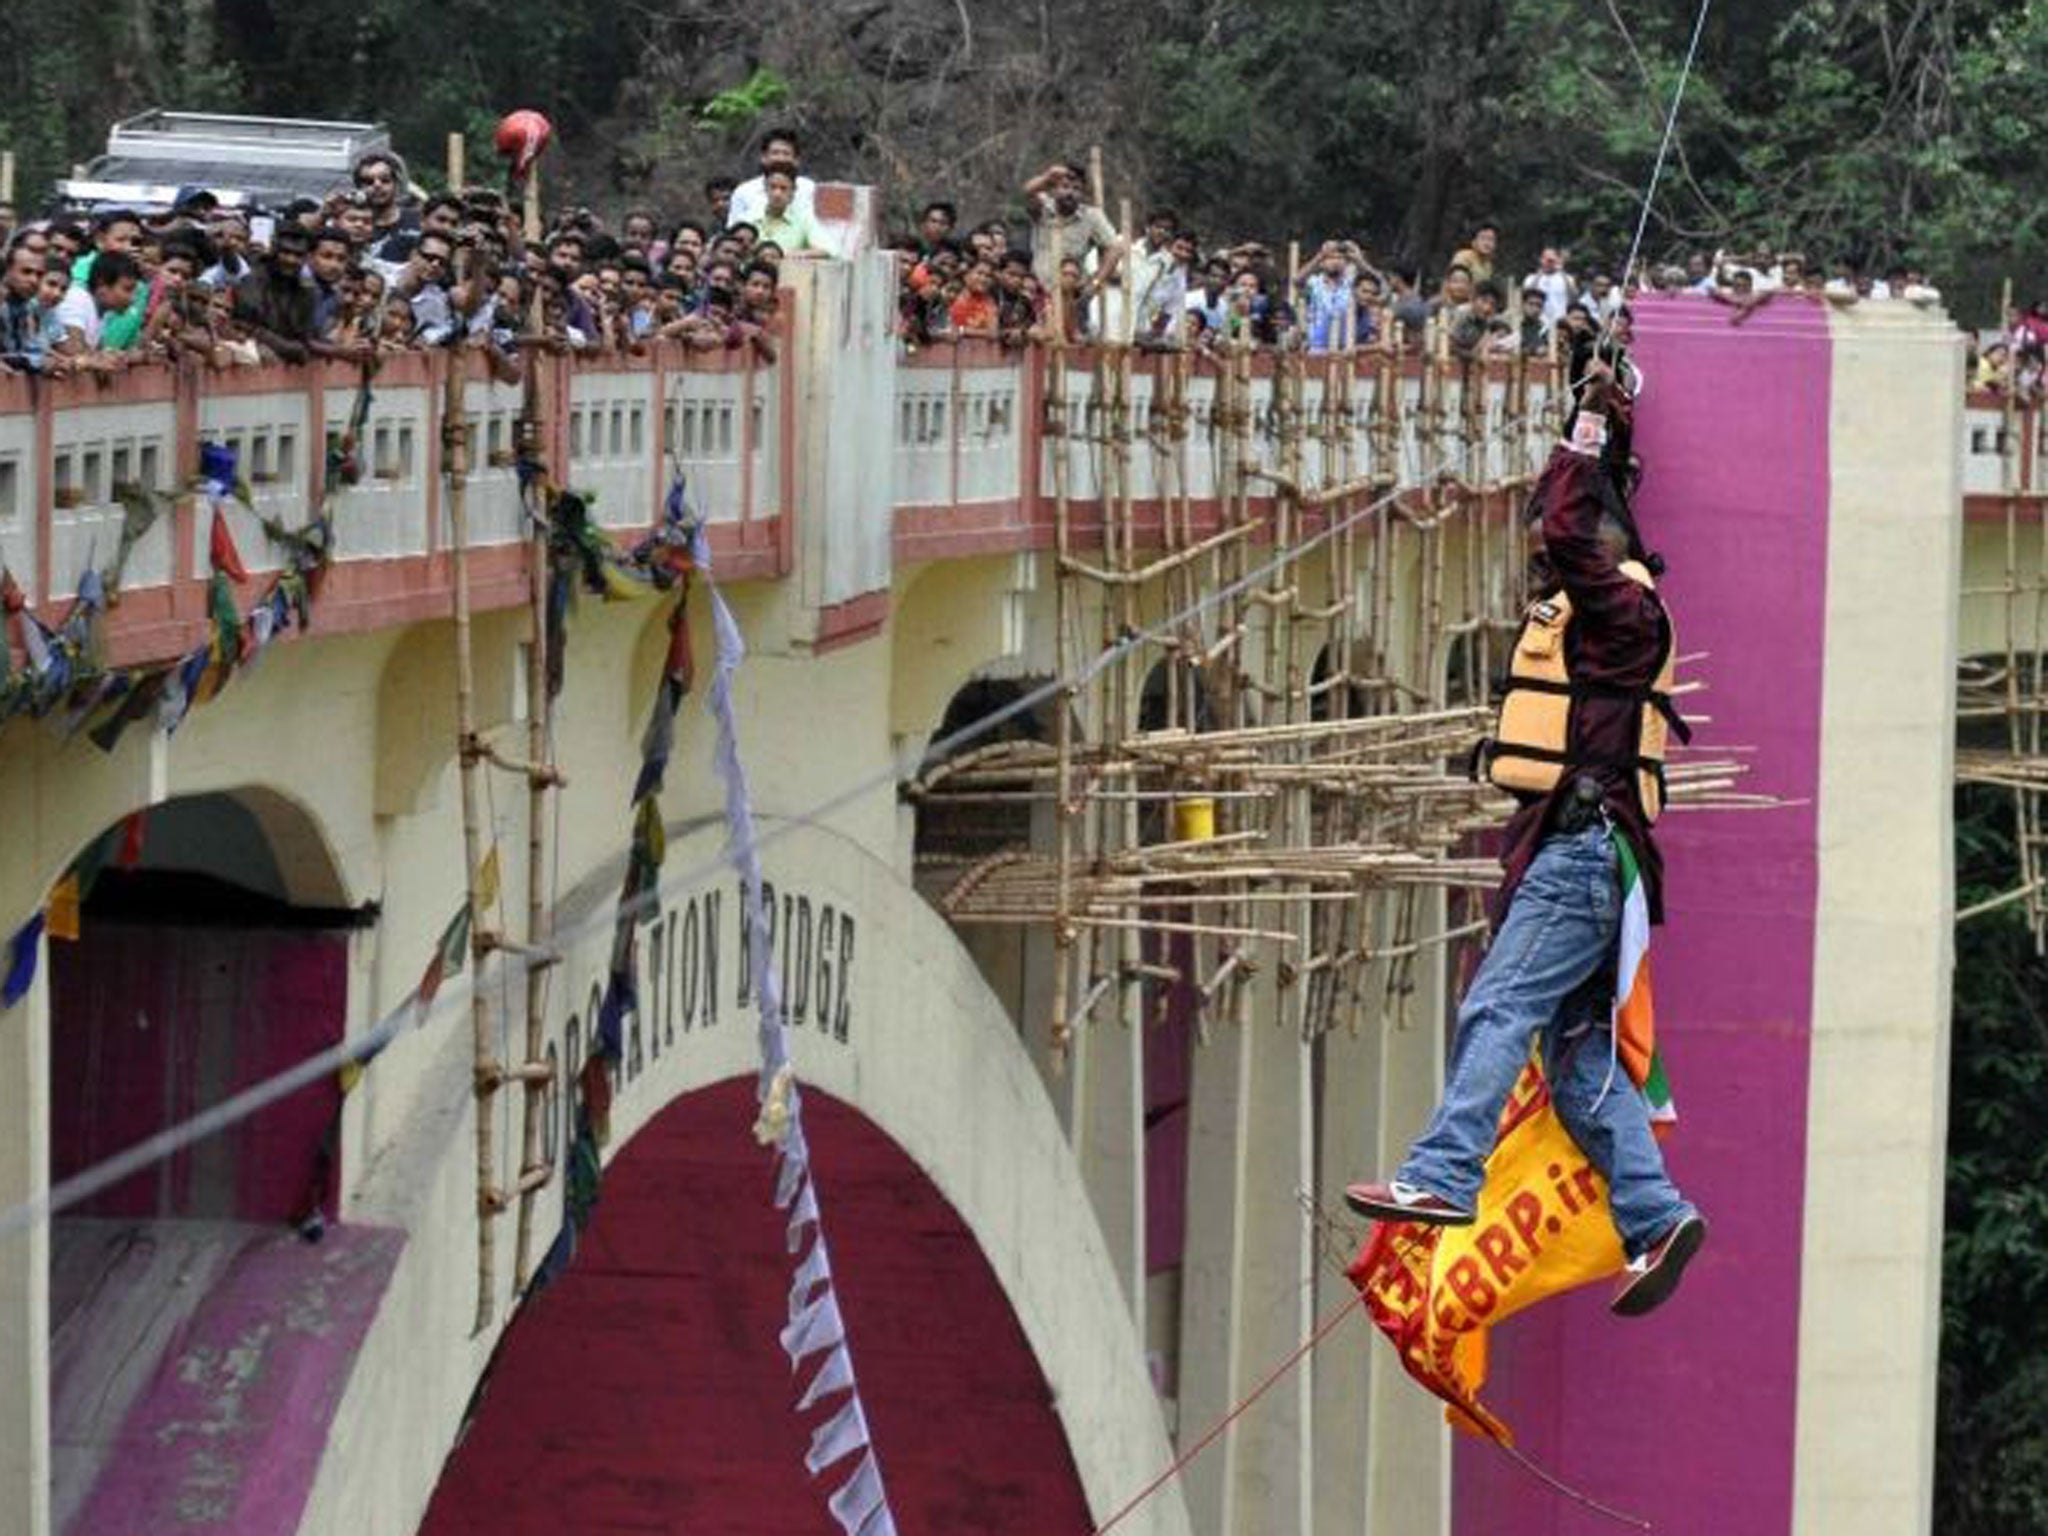 Indian stuntman Sailendra Nath Roy, watched by onlookers while attempting to cross the River Teesta, shortly before his death